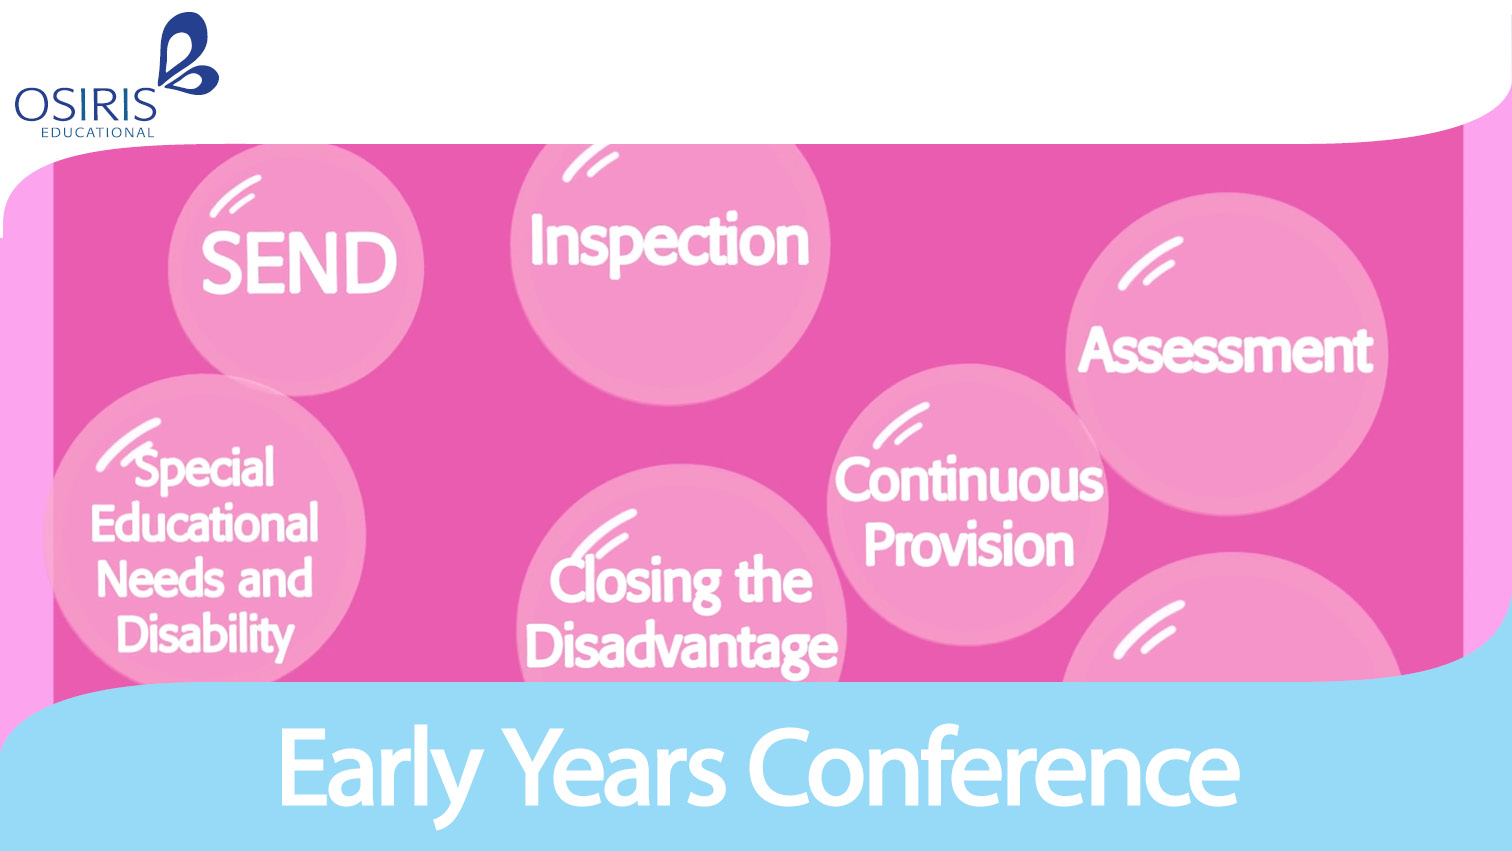 Early Years Conference 2019 Osiris Educational